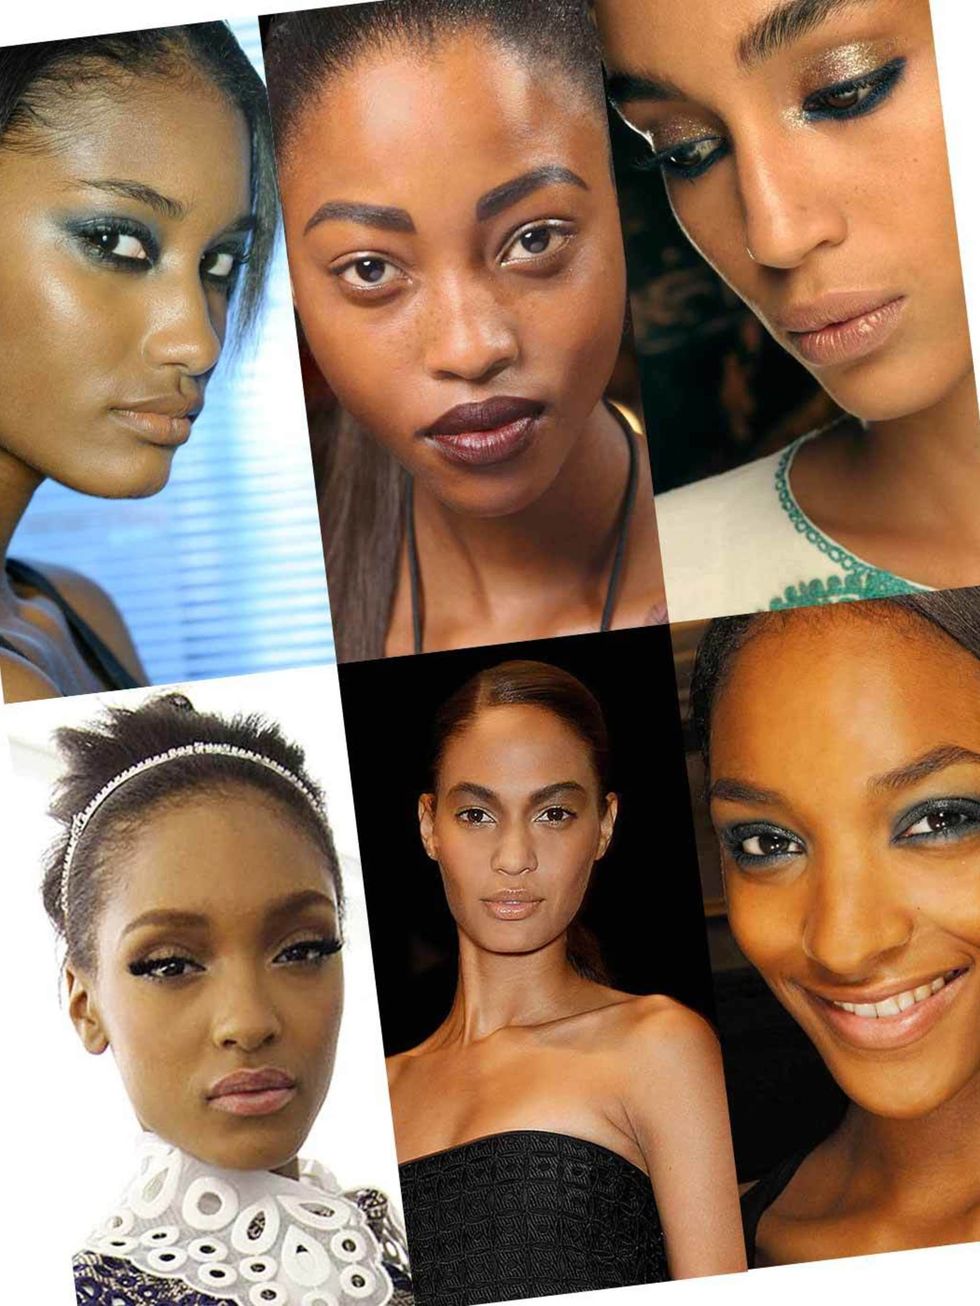 <p>This S/S12 the catwalk was awash with some truly eclectic and directional trends, which not only look good on the runway but also on darker skin tones.  To get this seasons look see how to create gilded gold leaf metallics on the eyes, wine-stained st